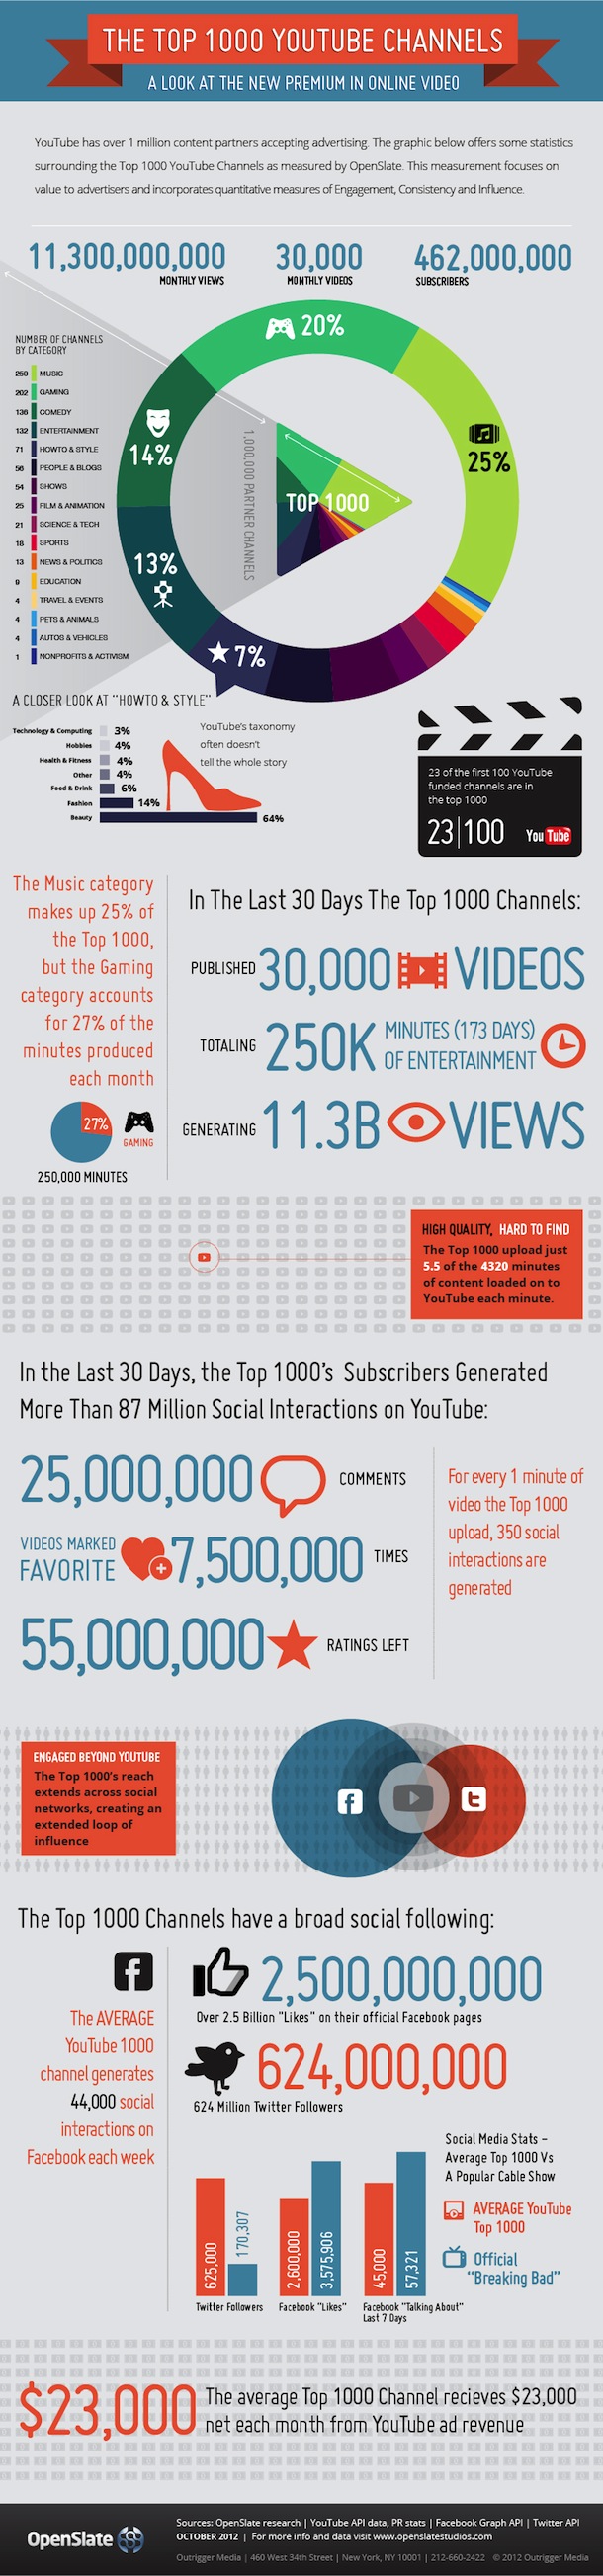 YouTube's Top 1,000 Channels Reveal An Industry Taking Shape [Infographicyy]